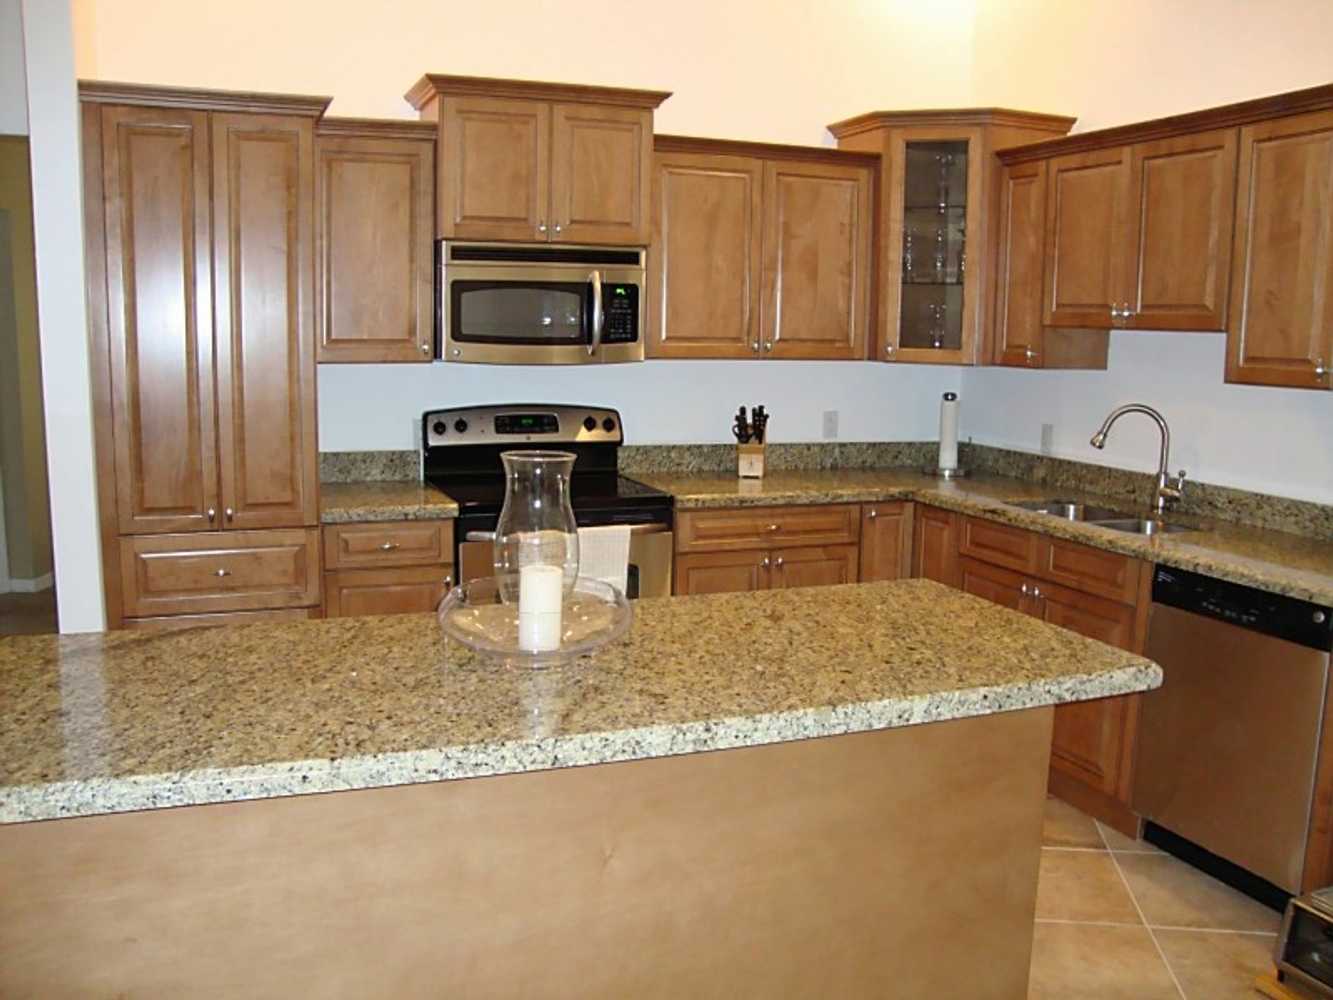 Kitchen Cabinets, Kitchen Remodeling, Granite Countertops By Ideal Kitchen and Bath